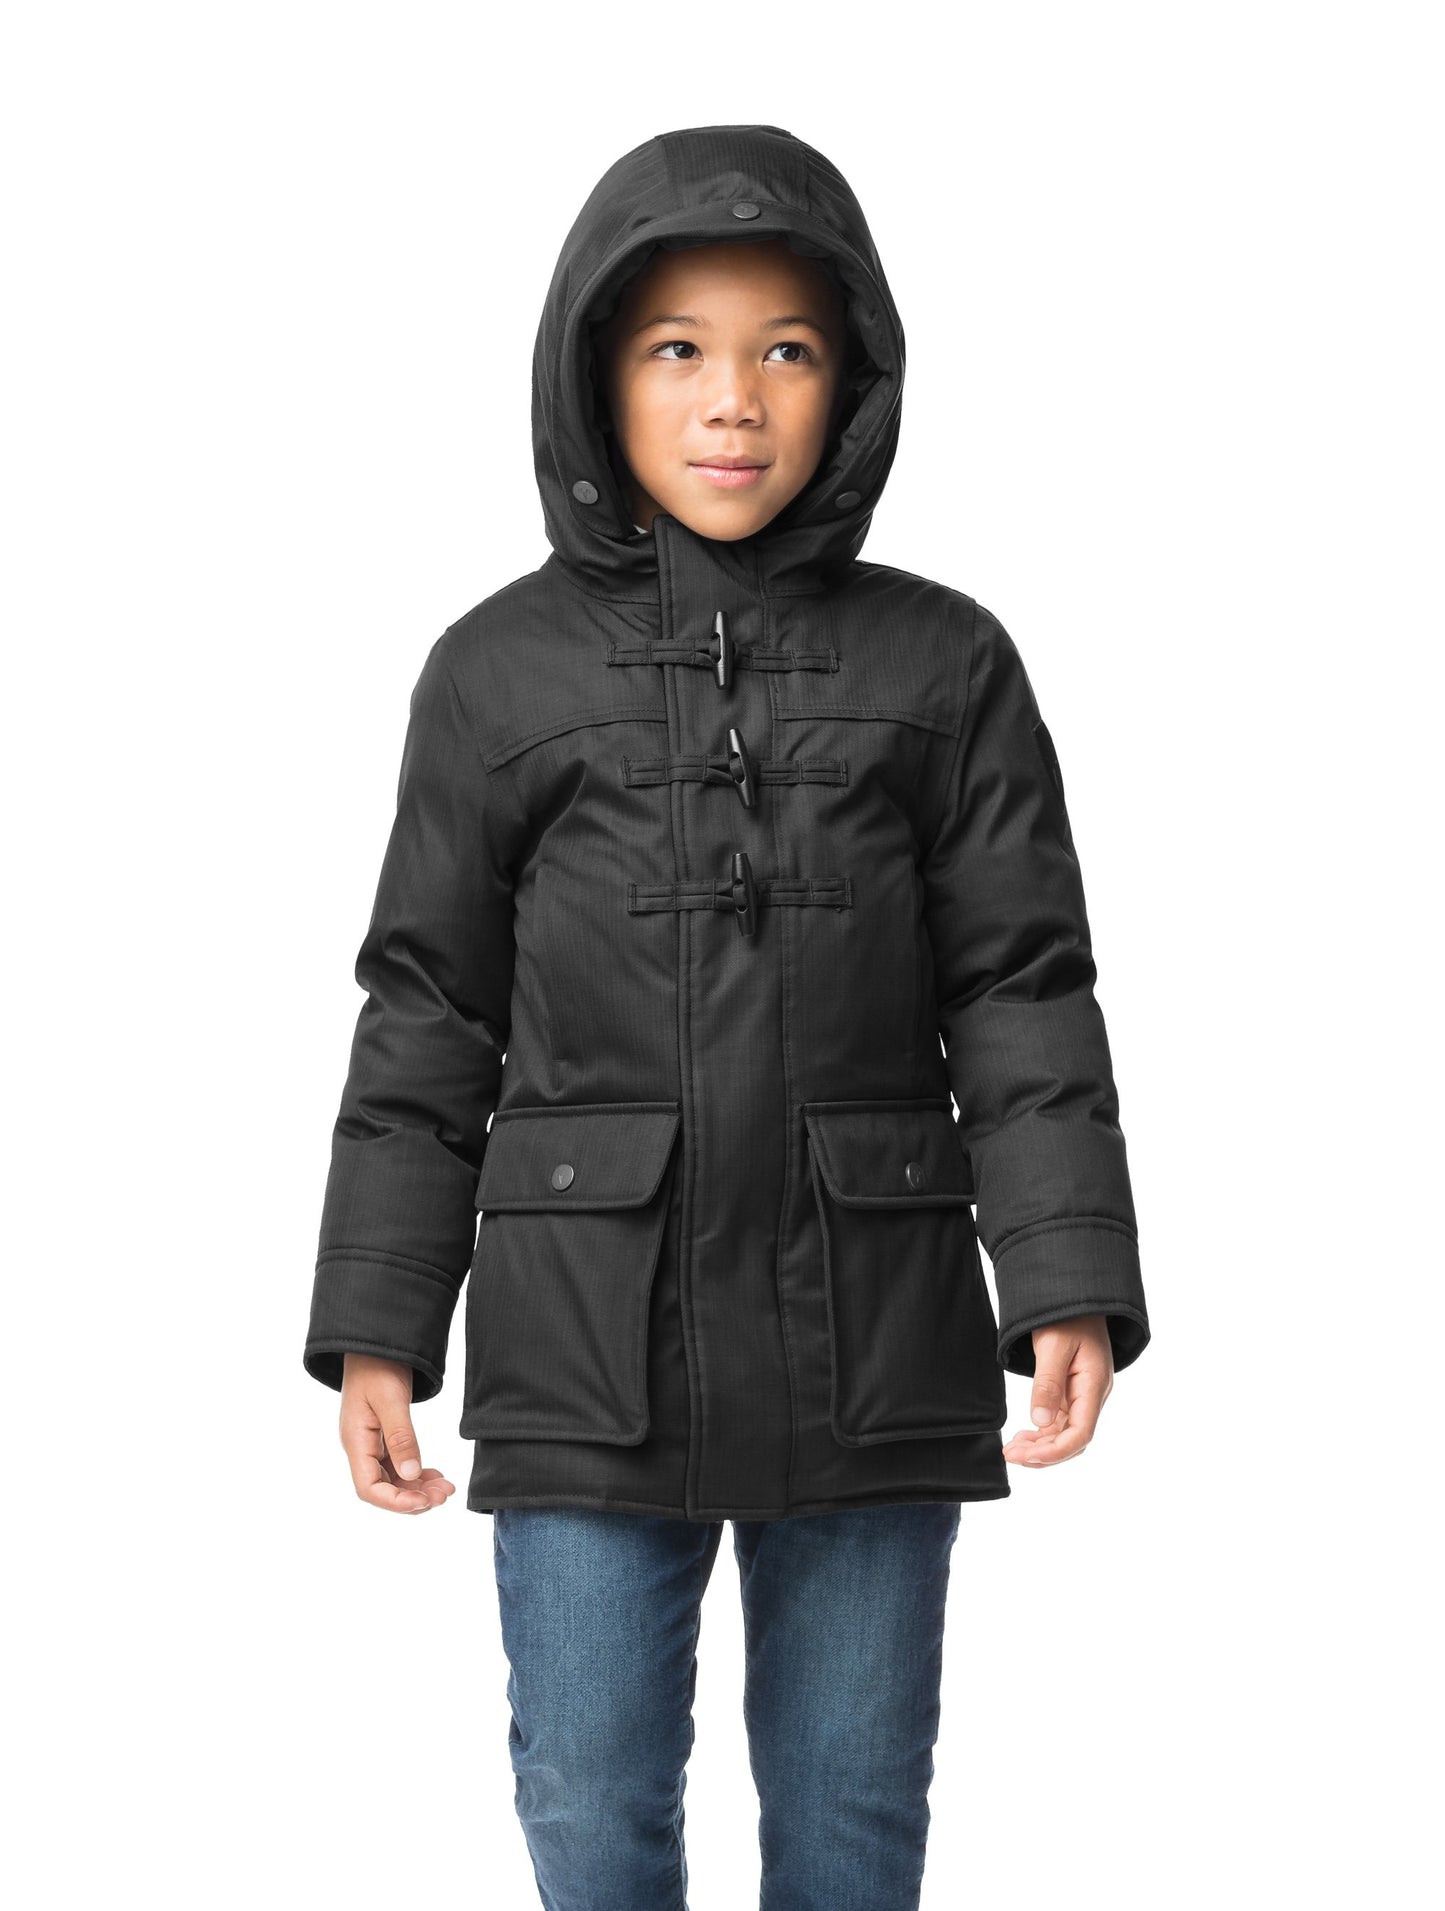 Kid's thigh high down coat with toggle closures in CH Black